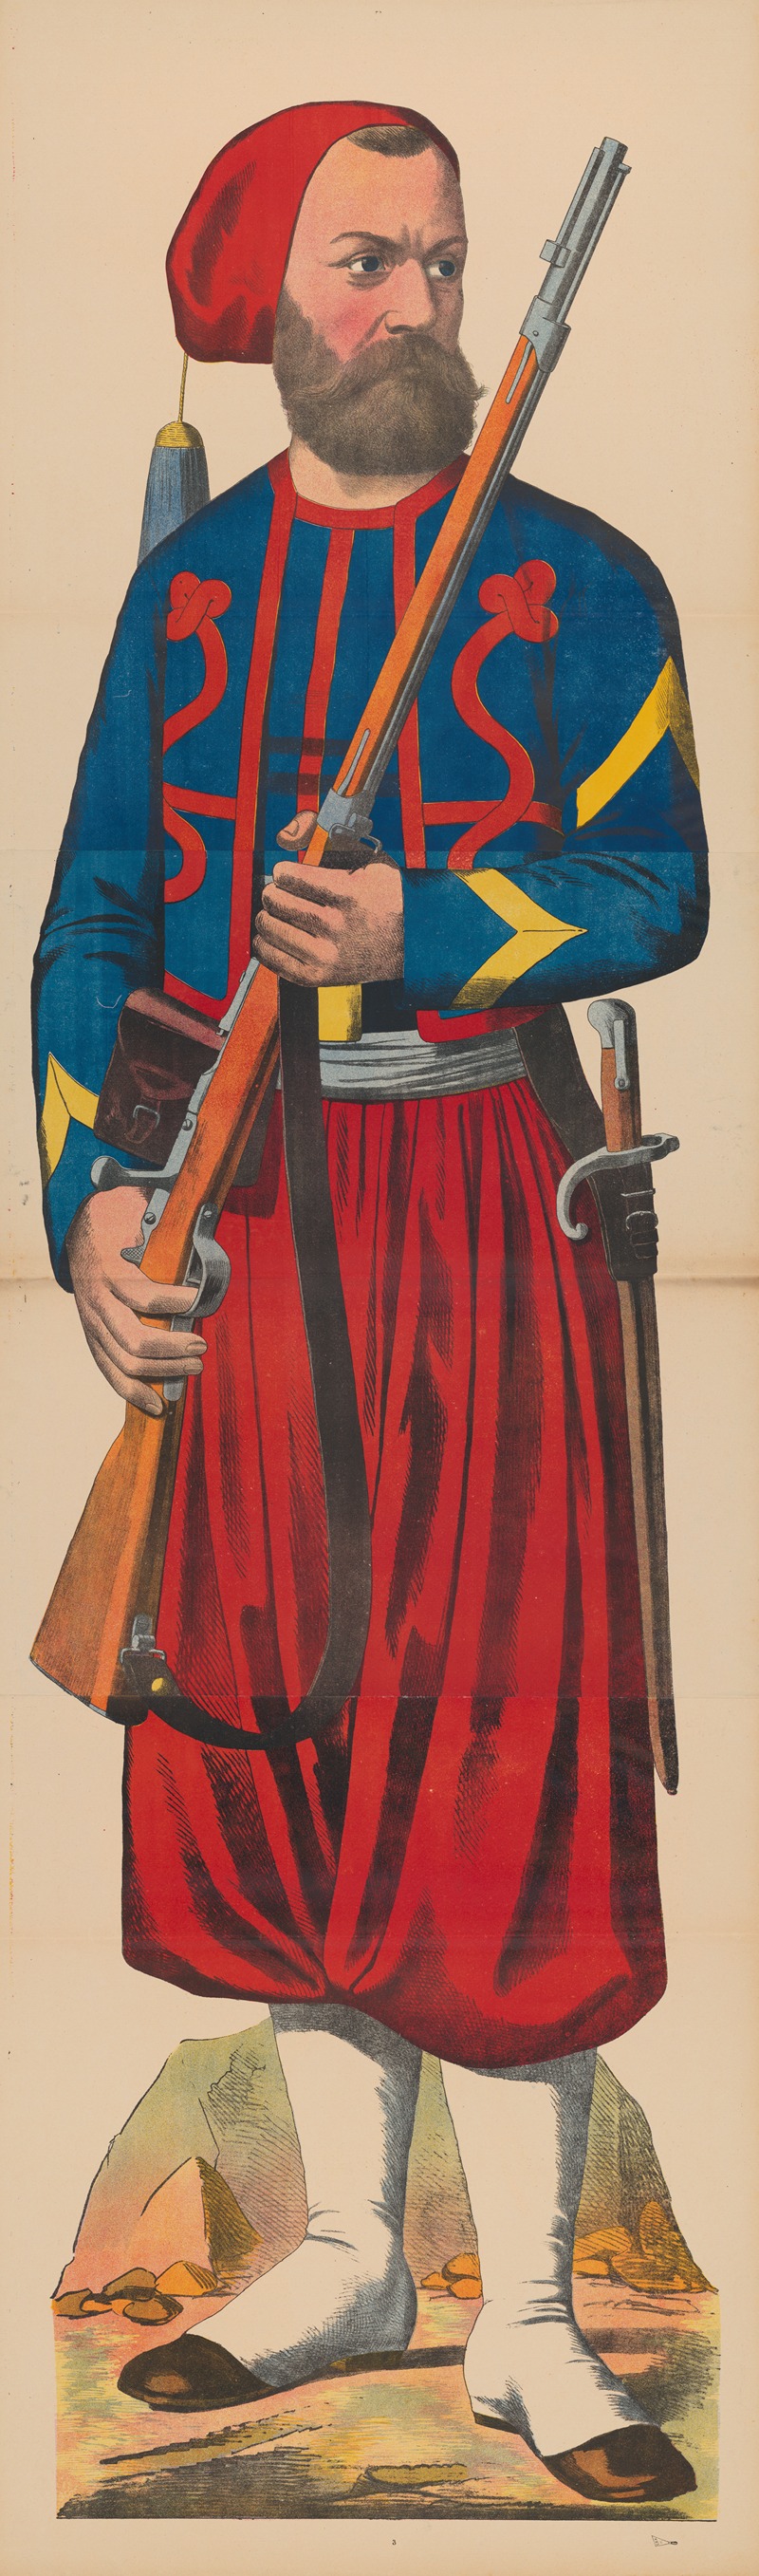 René Ackermann - Unidentified French zouave in uniform with rifle and sword